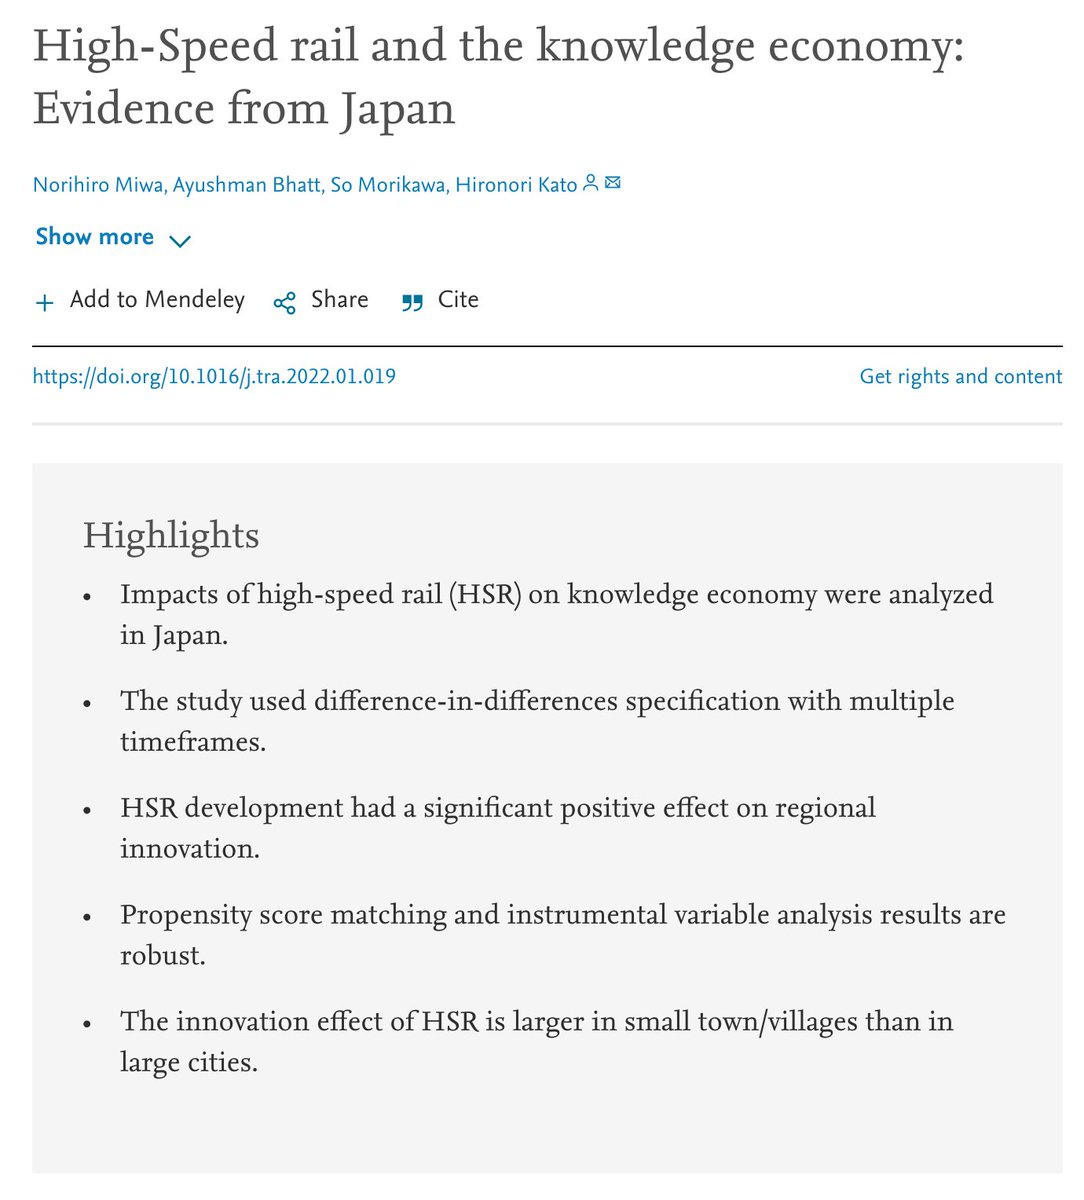 Miwa, Norihiro, Ayushman Bhatt, So Morikawa, and Hironori Kato. “High-Speed Rail and the Knowledge Economy: Evidence from Japan.” Transportation Research Part A: Policy and Practice, February 23, 2022. 
https://t.co/rOnoSM0vCX. https://t.co/yq2GHGckfe